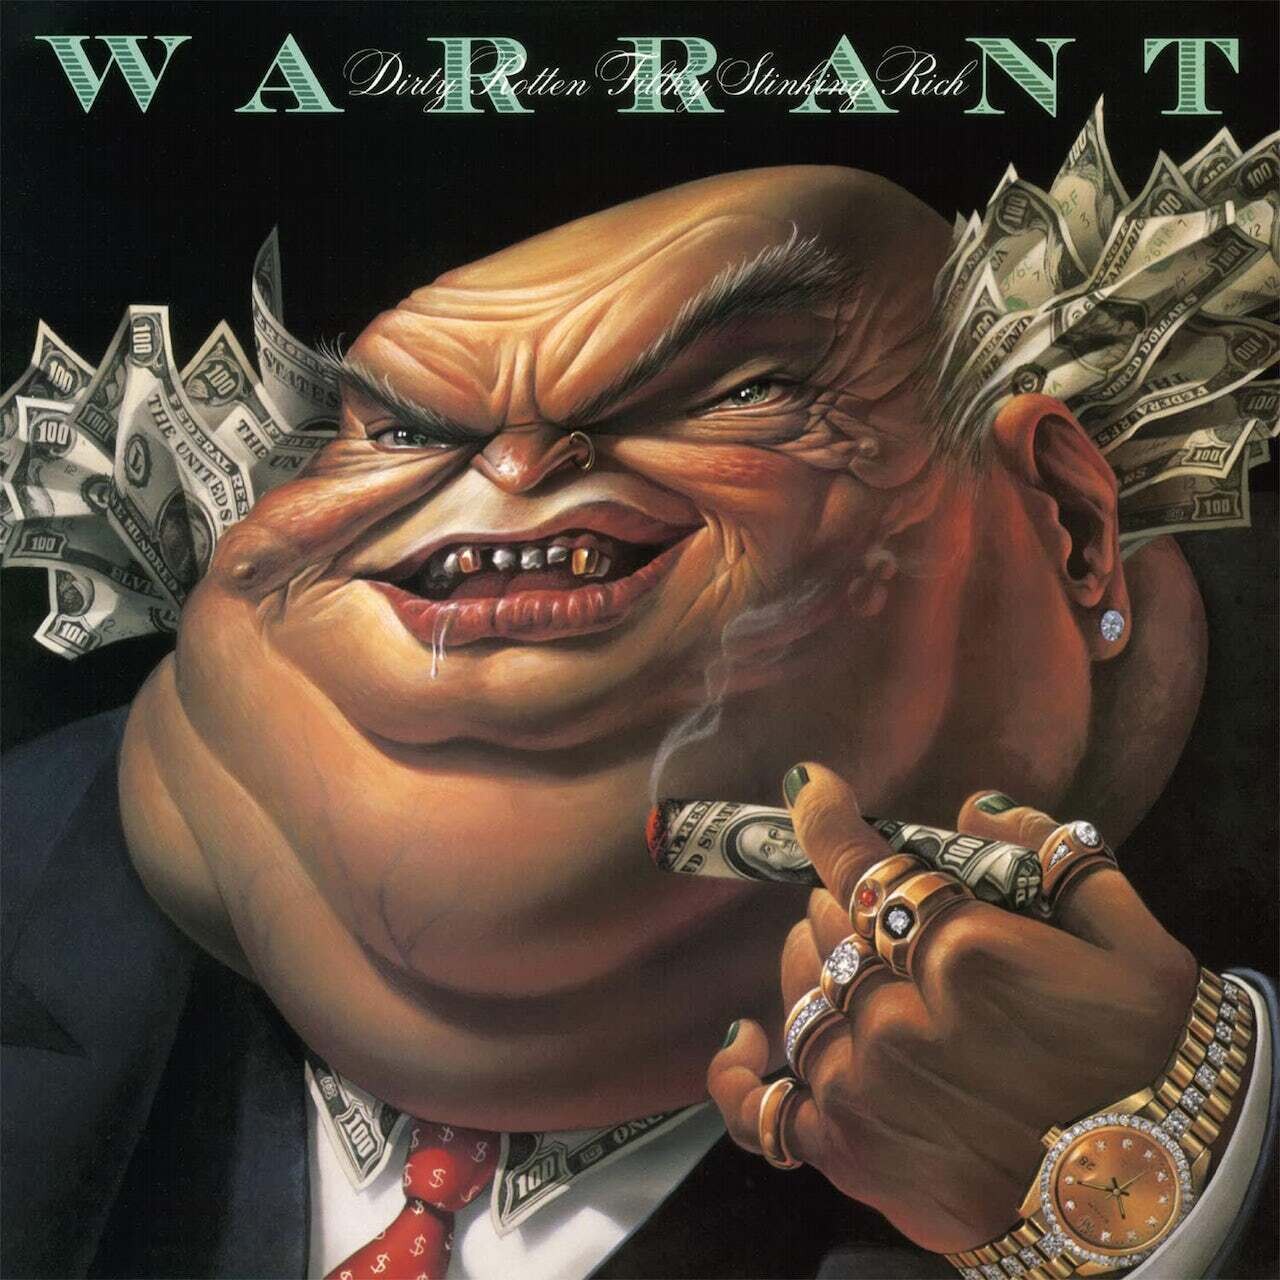 Warrant / Dirty Rotten Filthy Stinking Rich